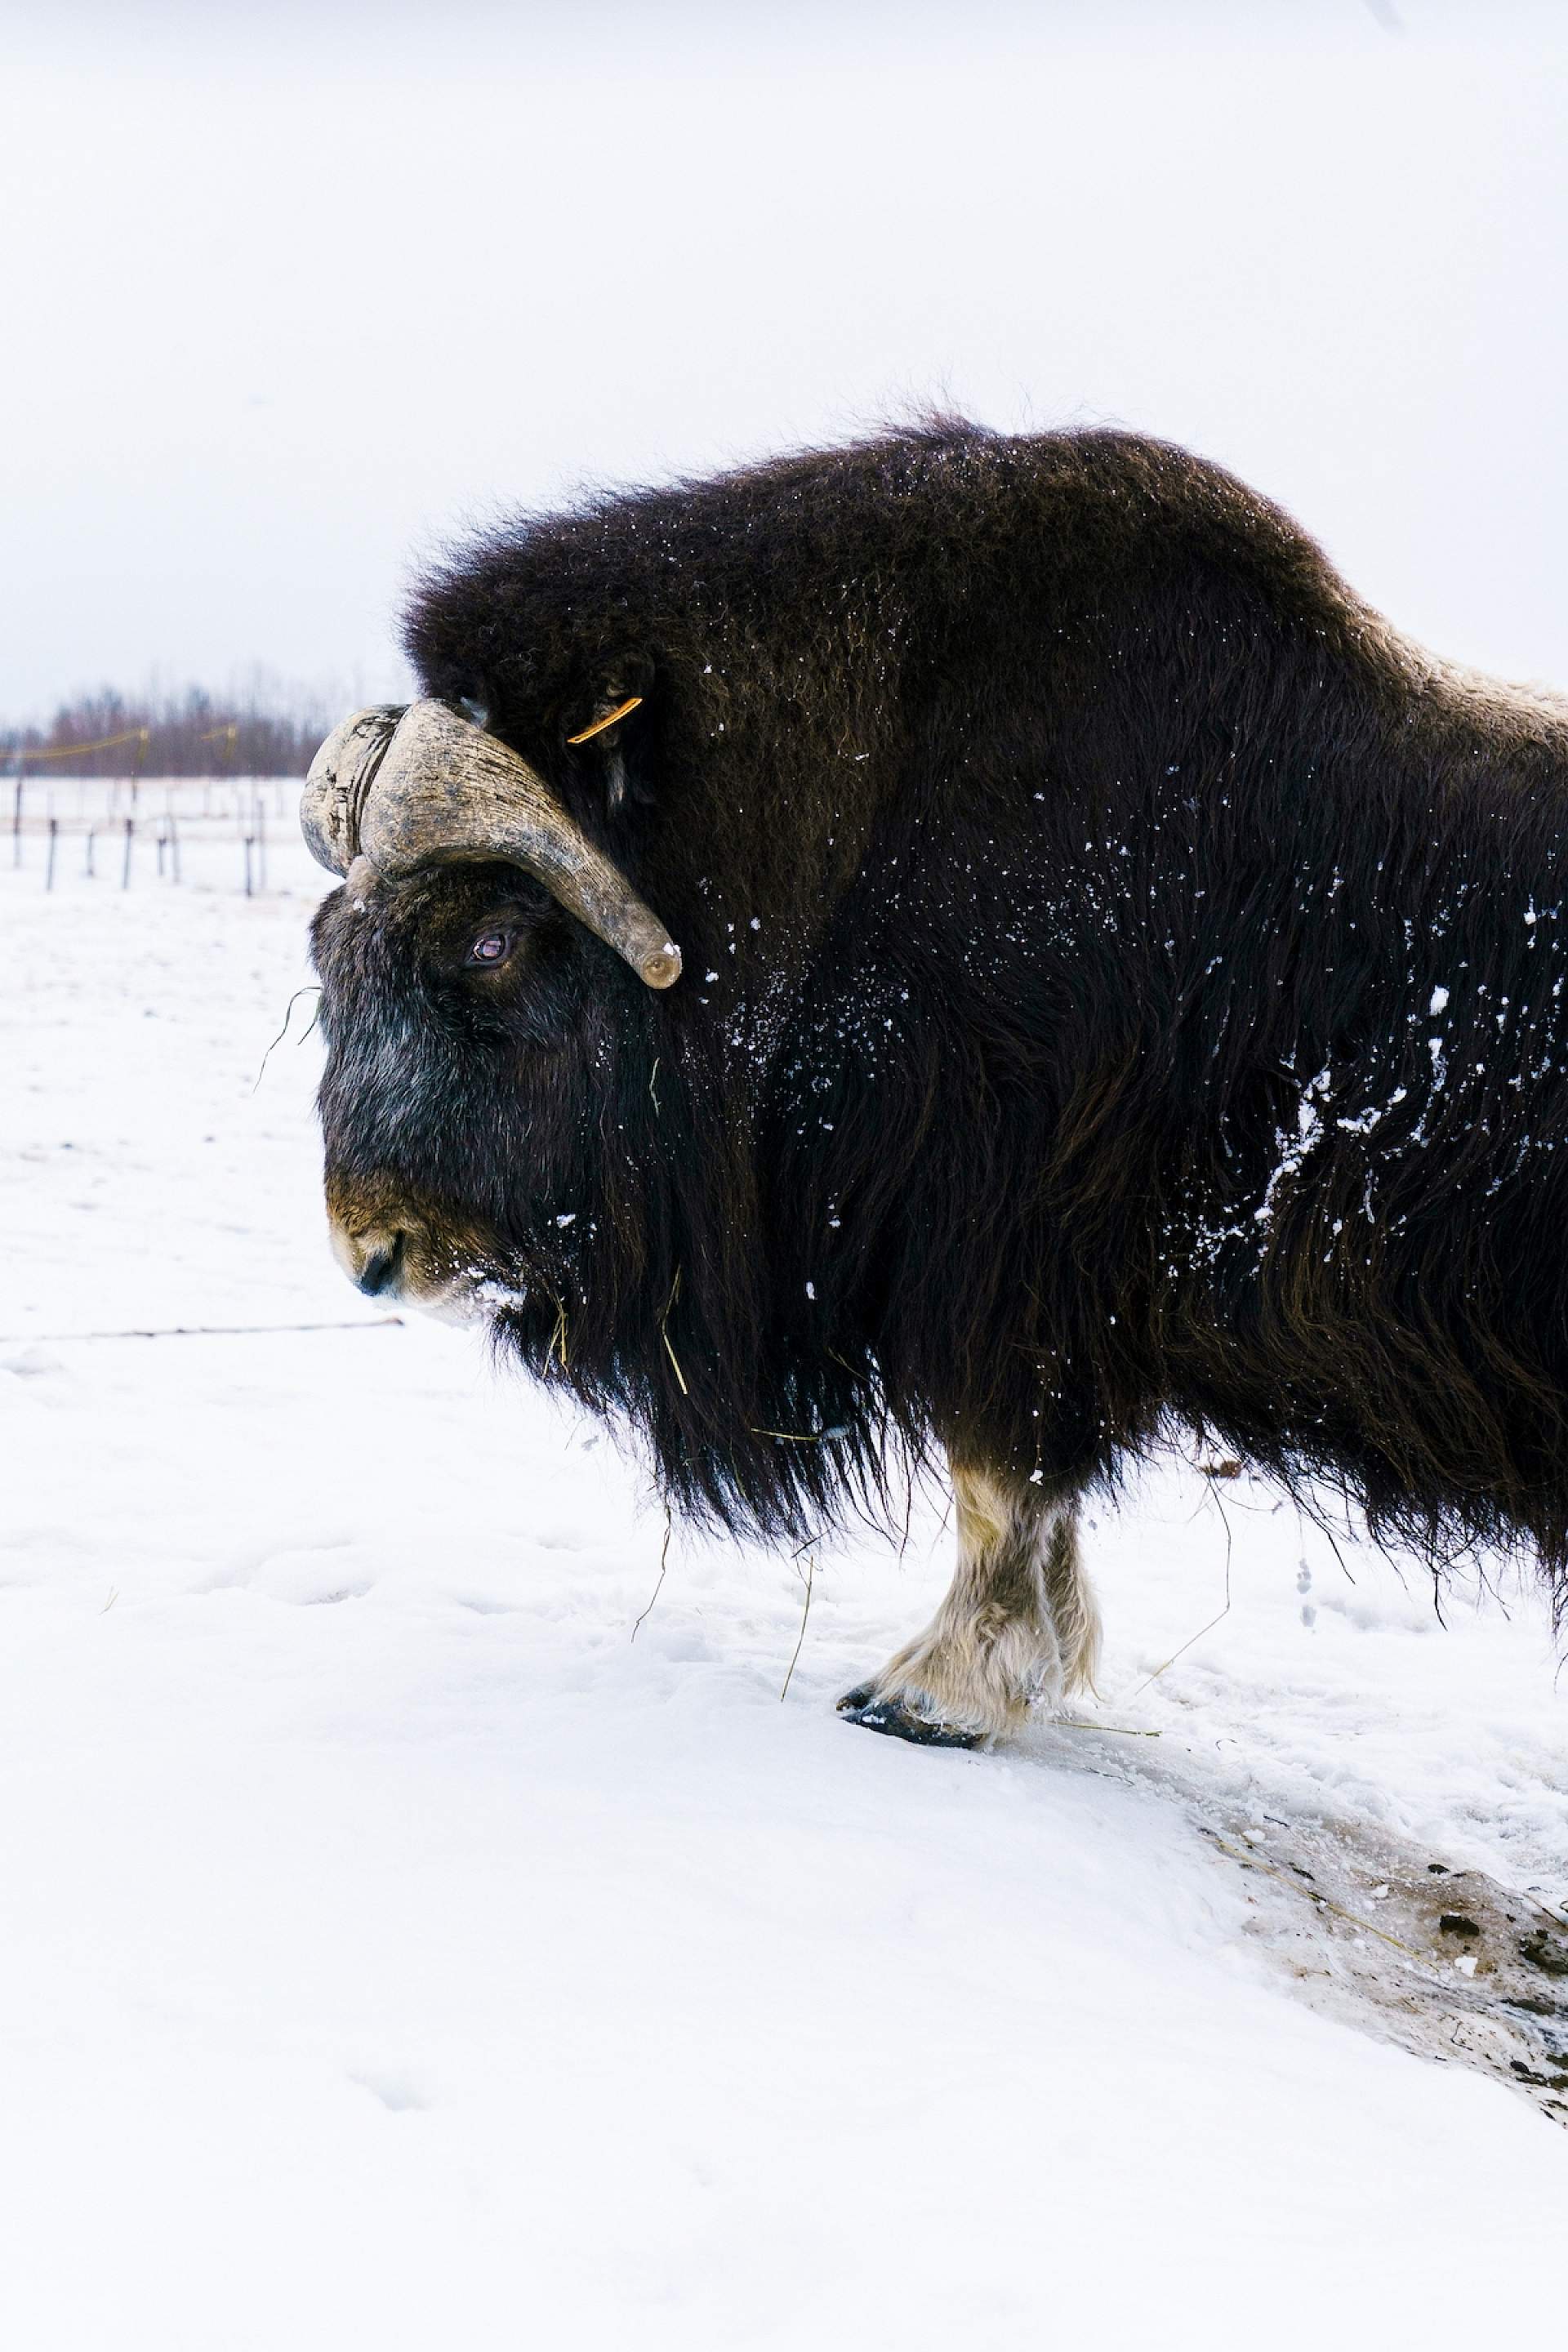 A Musk Ox stands in the snow at the Musk Ox Farm in Palmer, Alaska